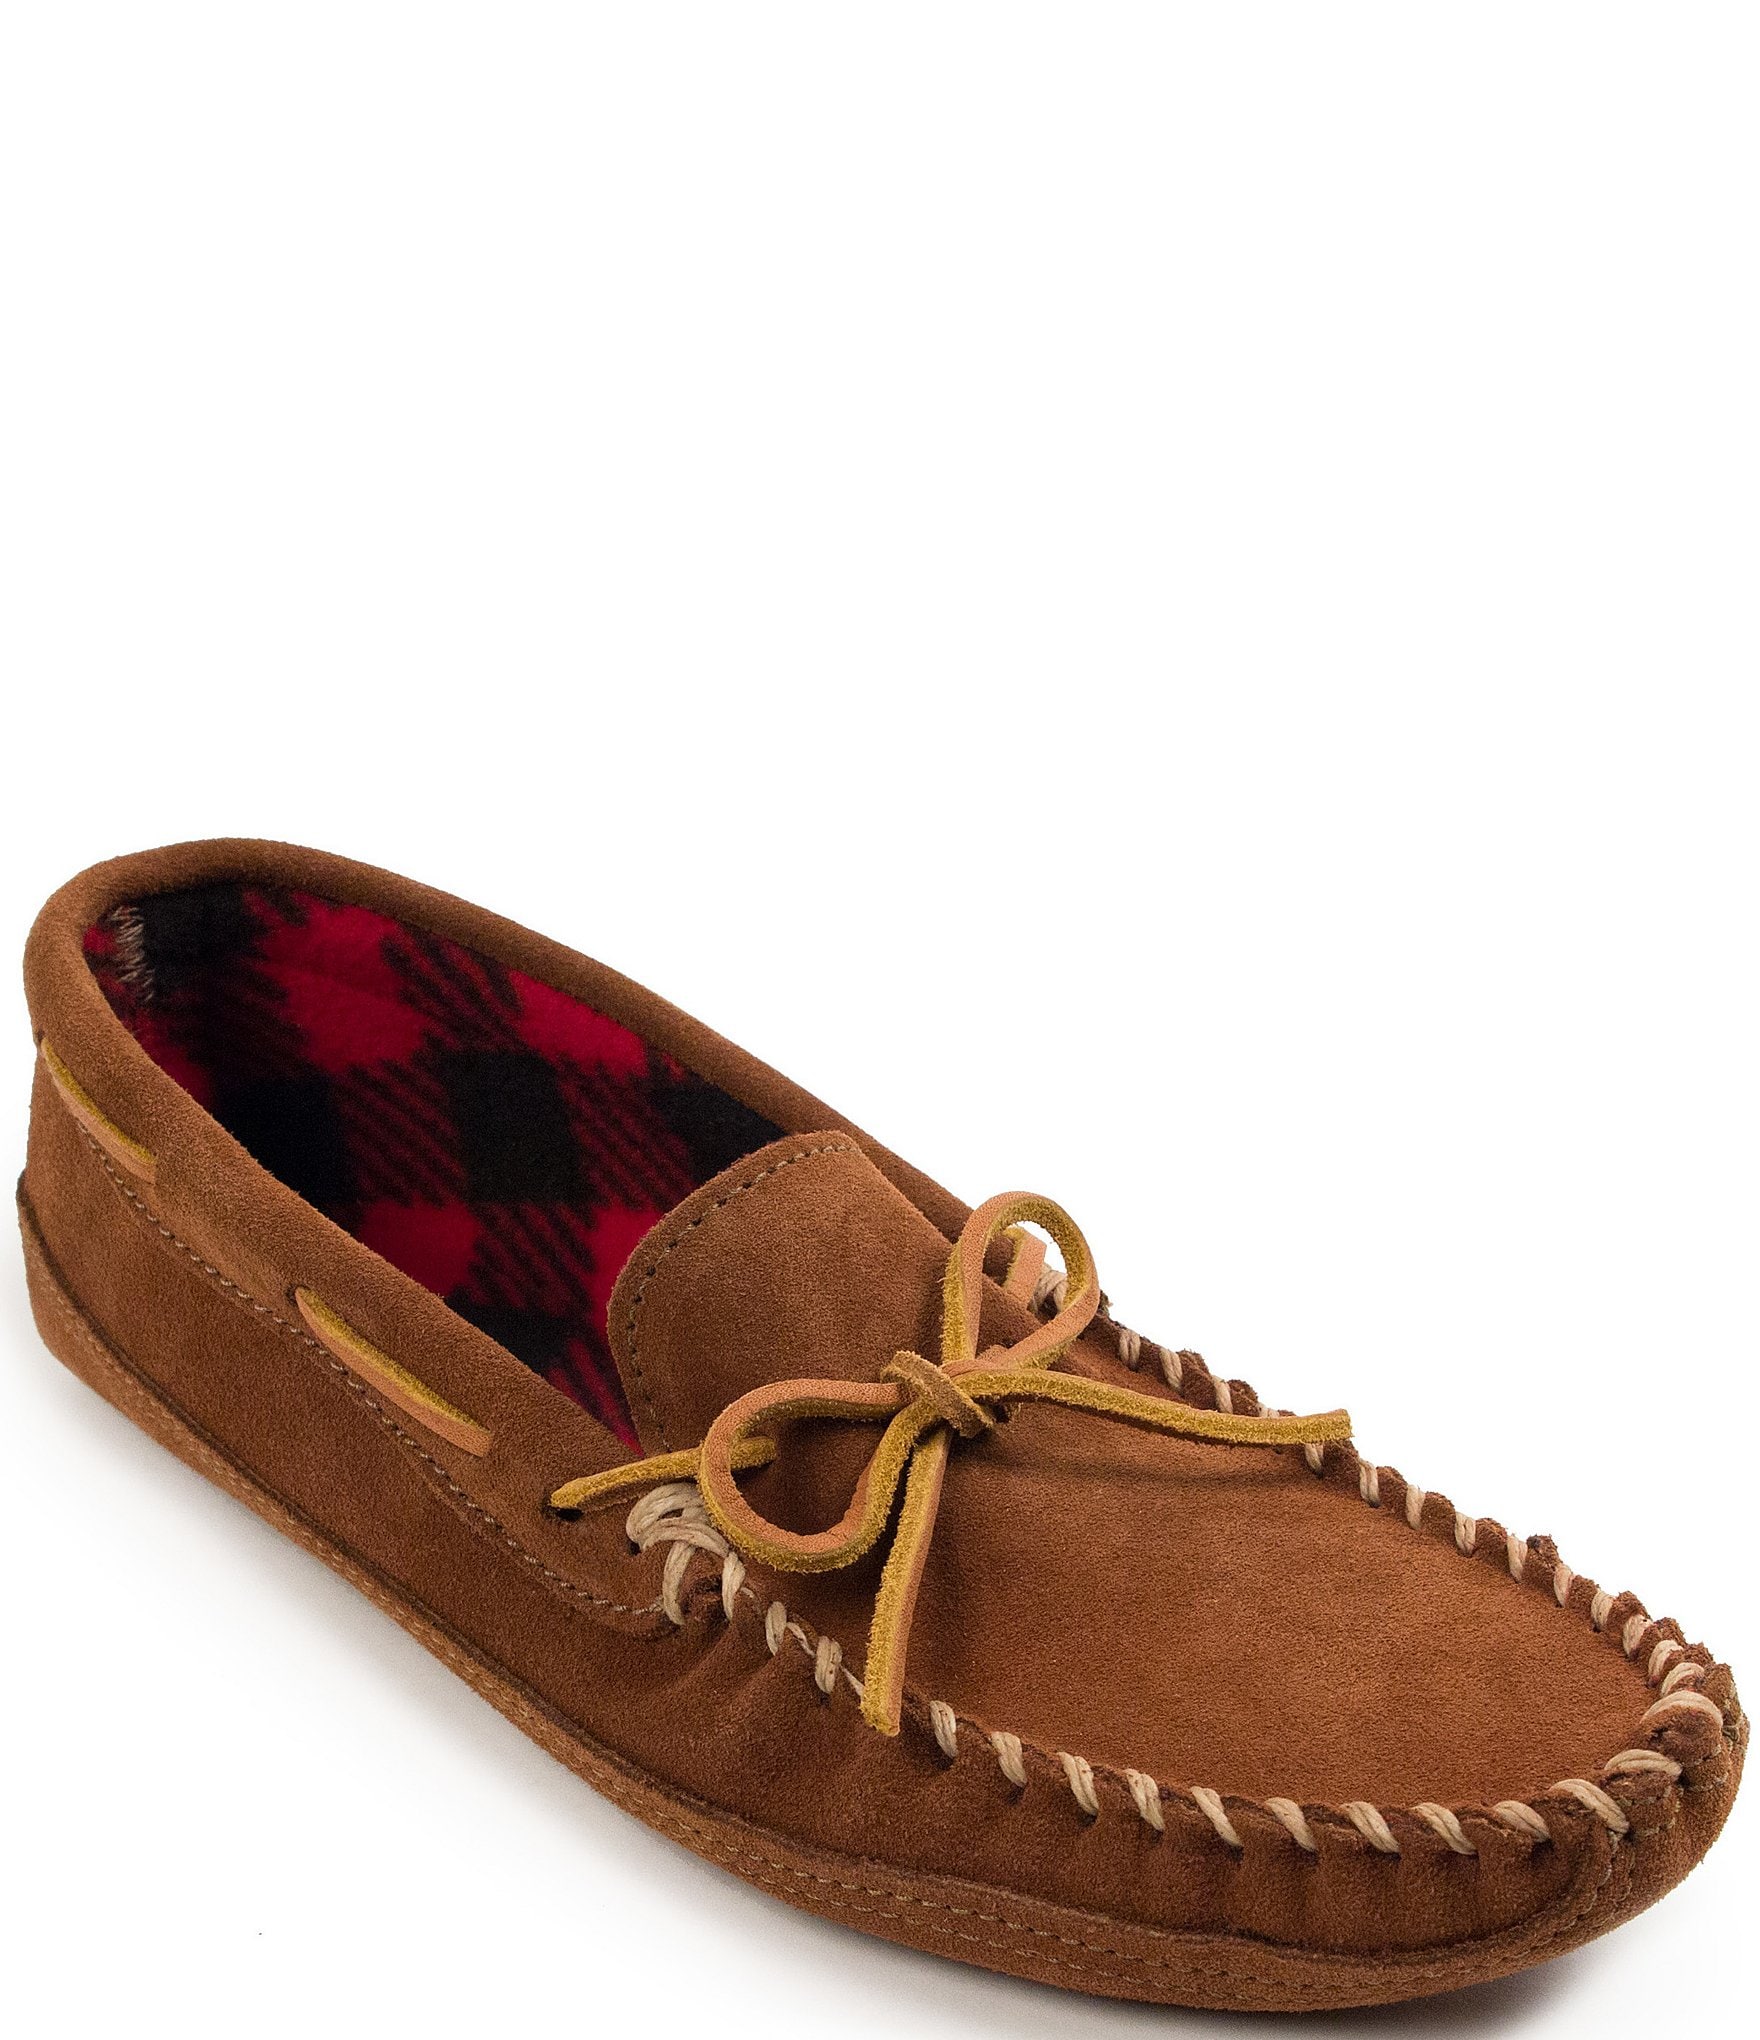 Clarks_Men's Suede Plaid Berber Lined Moccasin Slippers - QVC.com